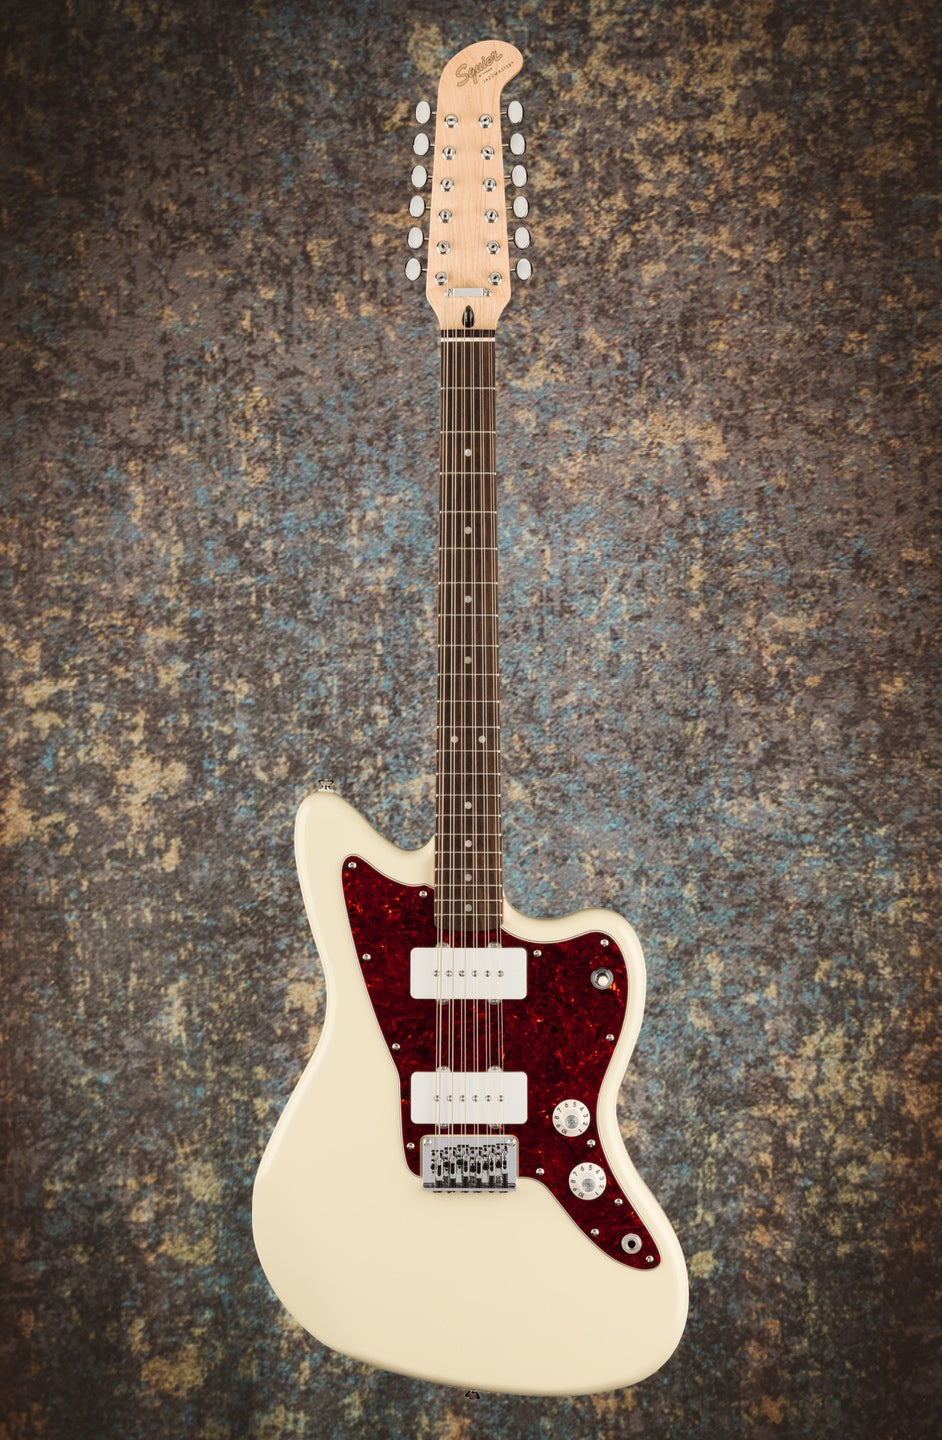 Squier Paranormal Series Jazzmaster XII, Olympic White